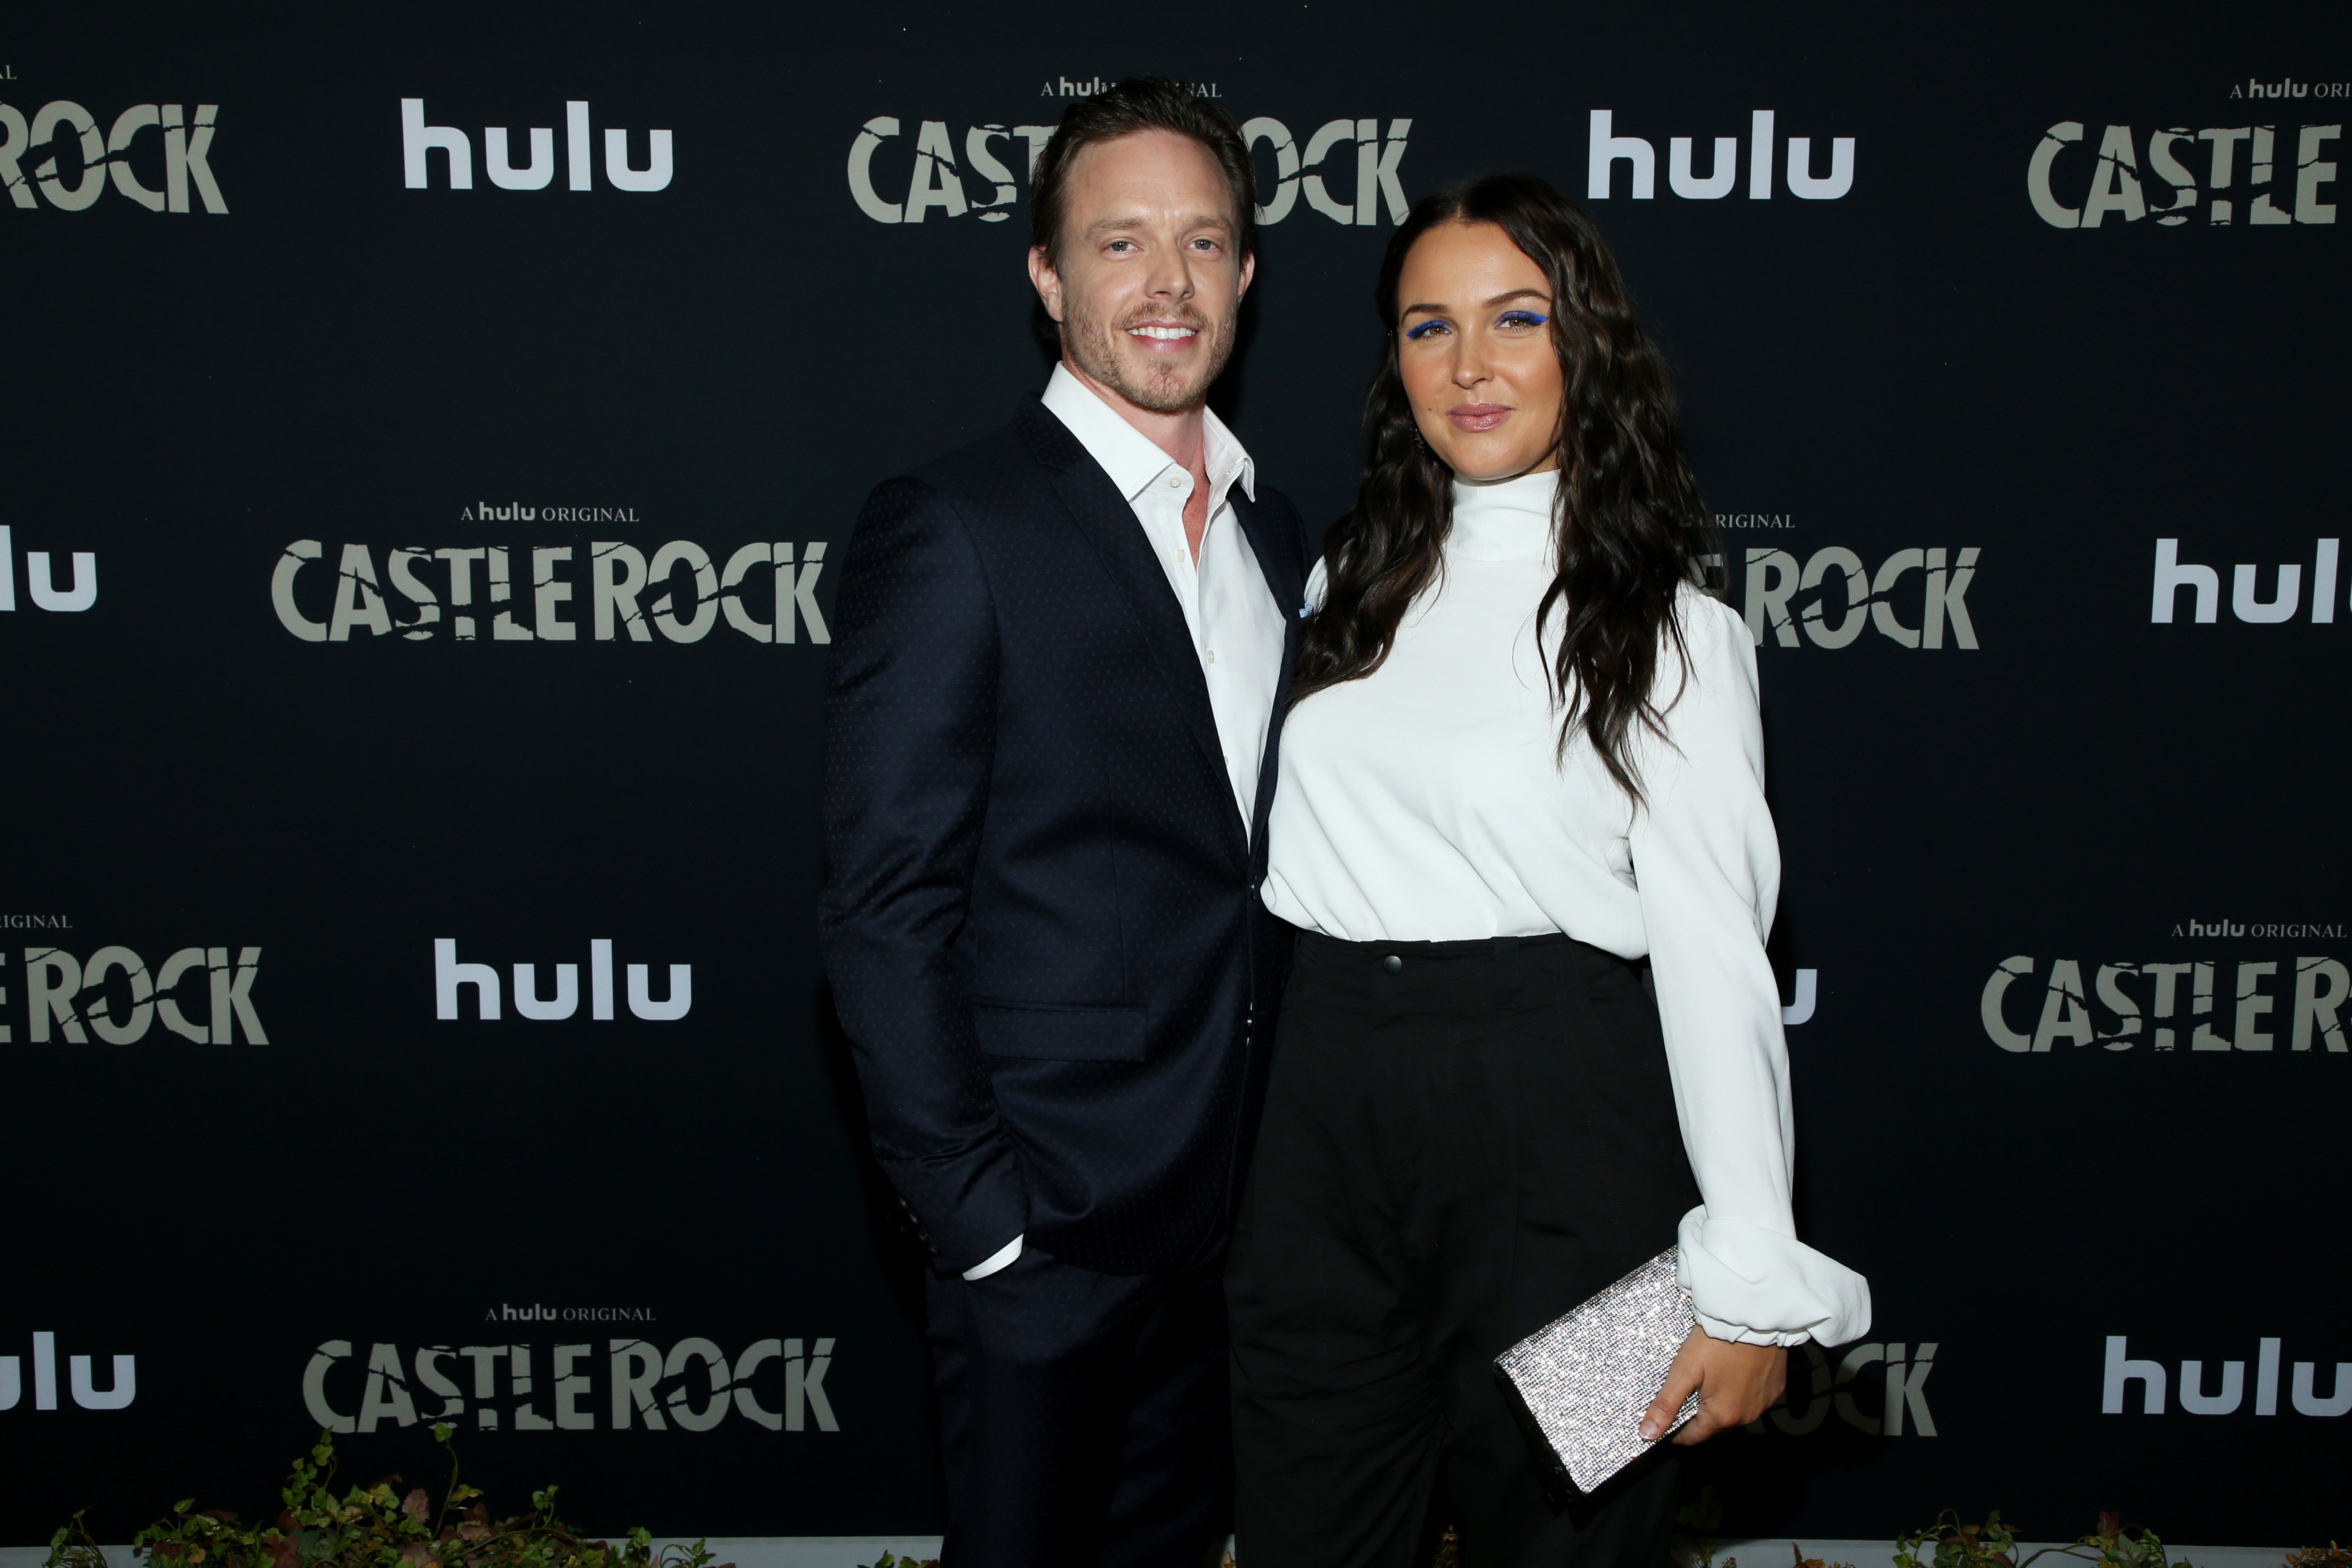 Matthew Alan and Camilla Luddington attend the premiere of "Castle Rock" Season 2 on October 14, 2019, in Los Angeles, California. | Source: Getty Images.